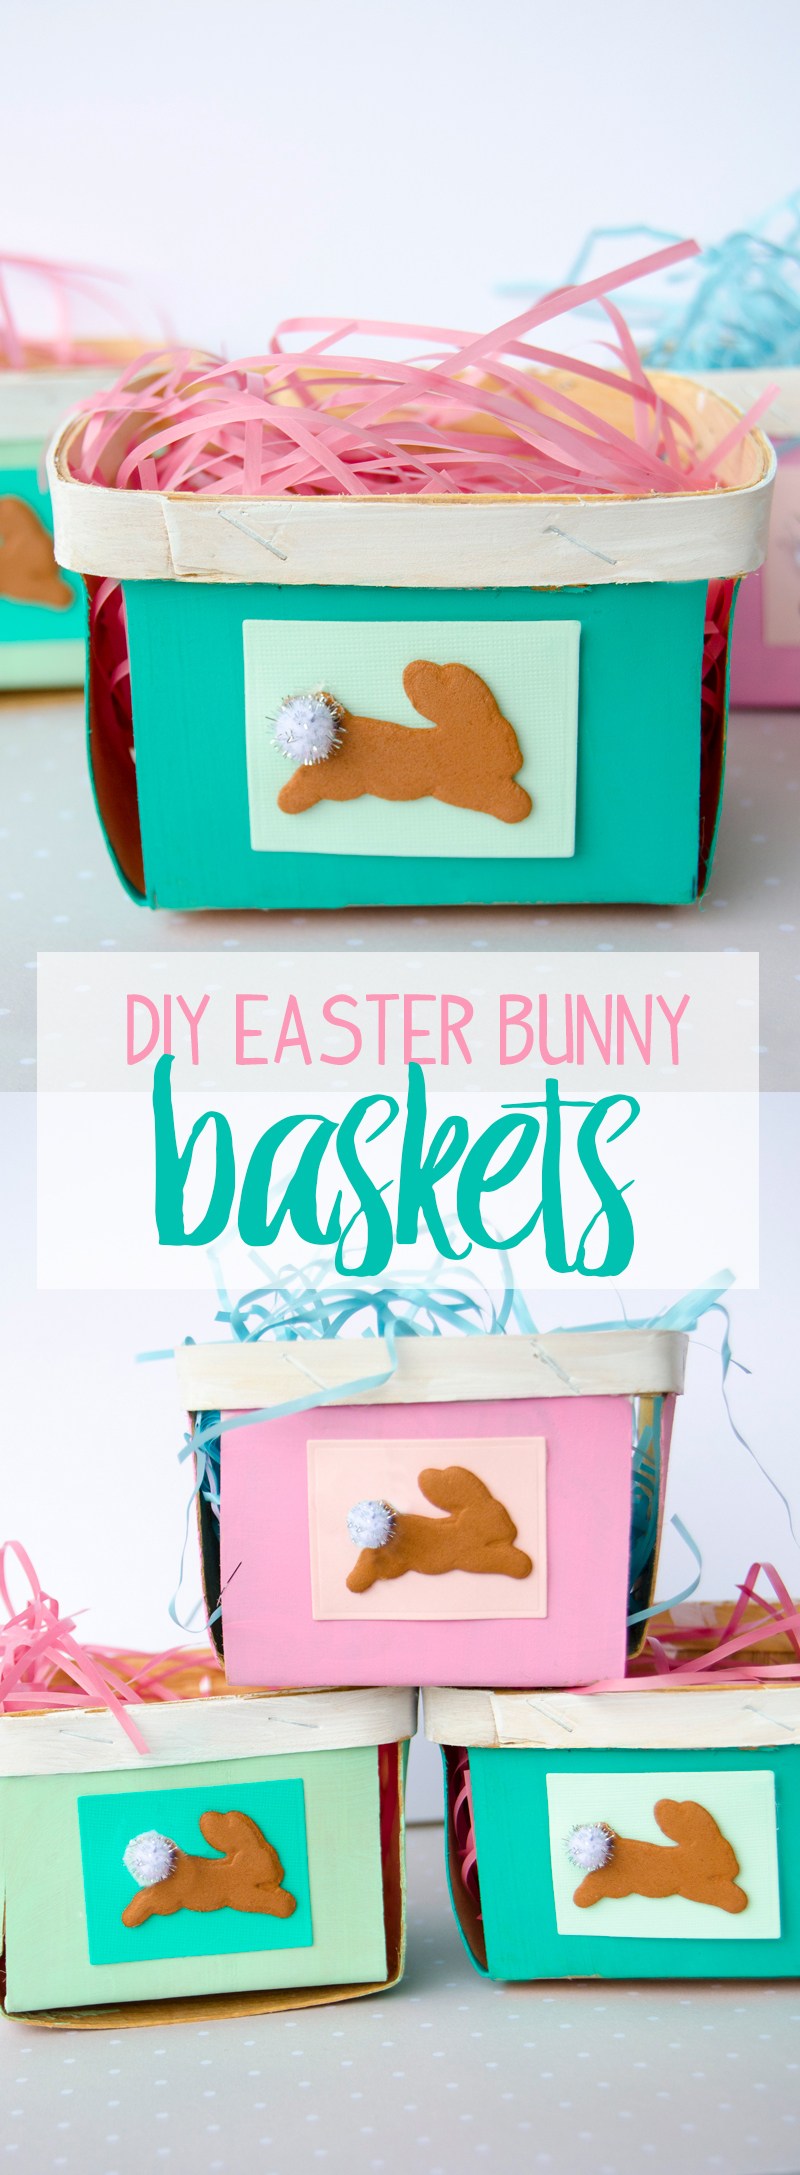 DIY Easter Baskets with Spellbinders by Lindi Haws of Love The Day